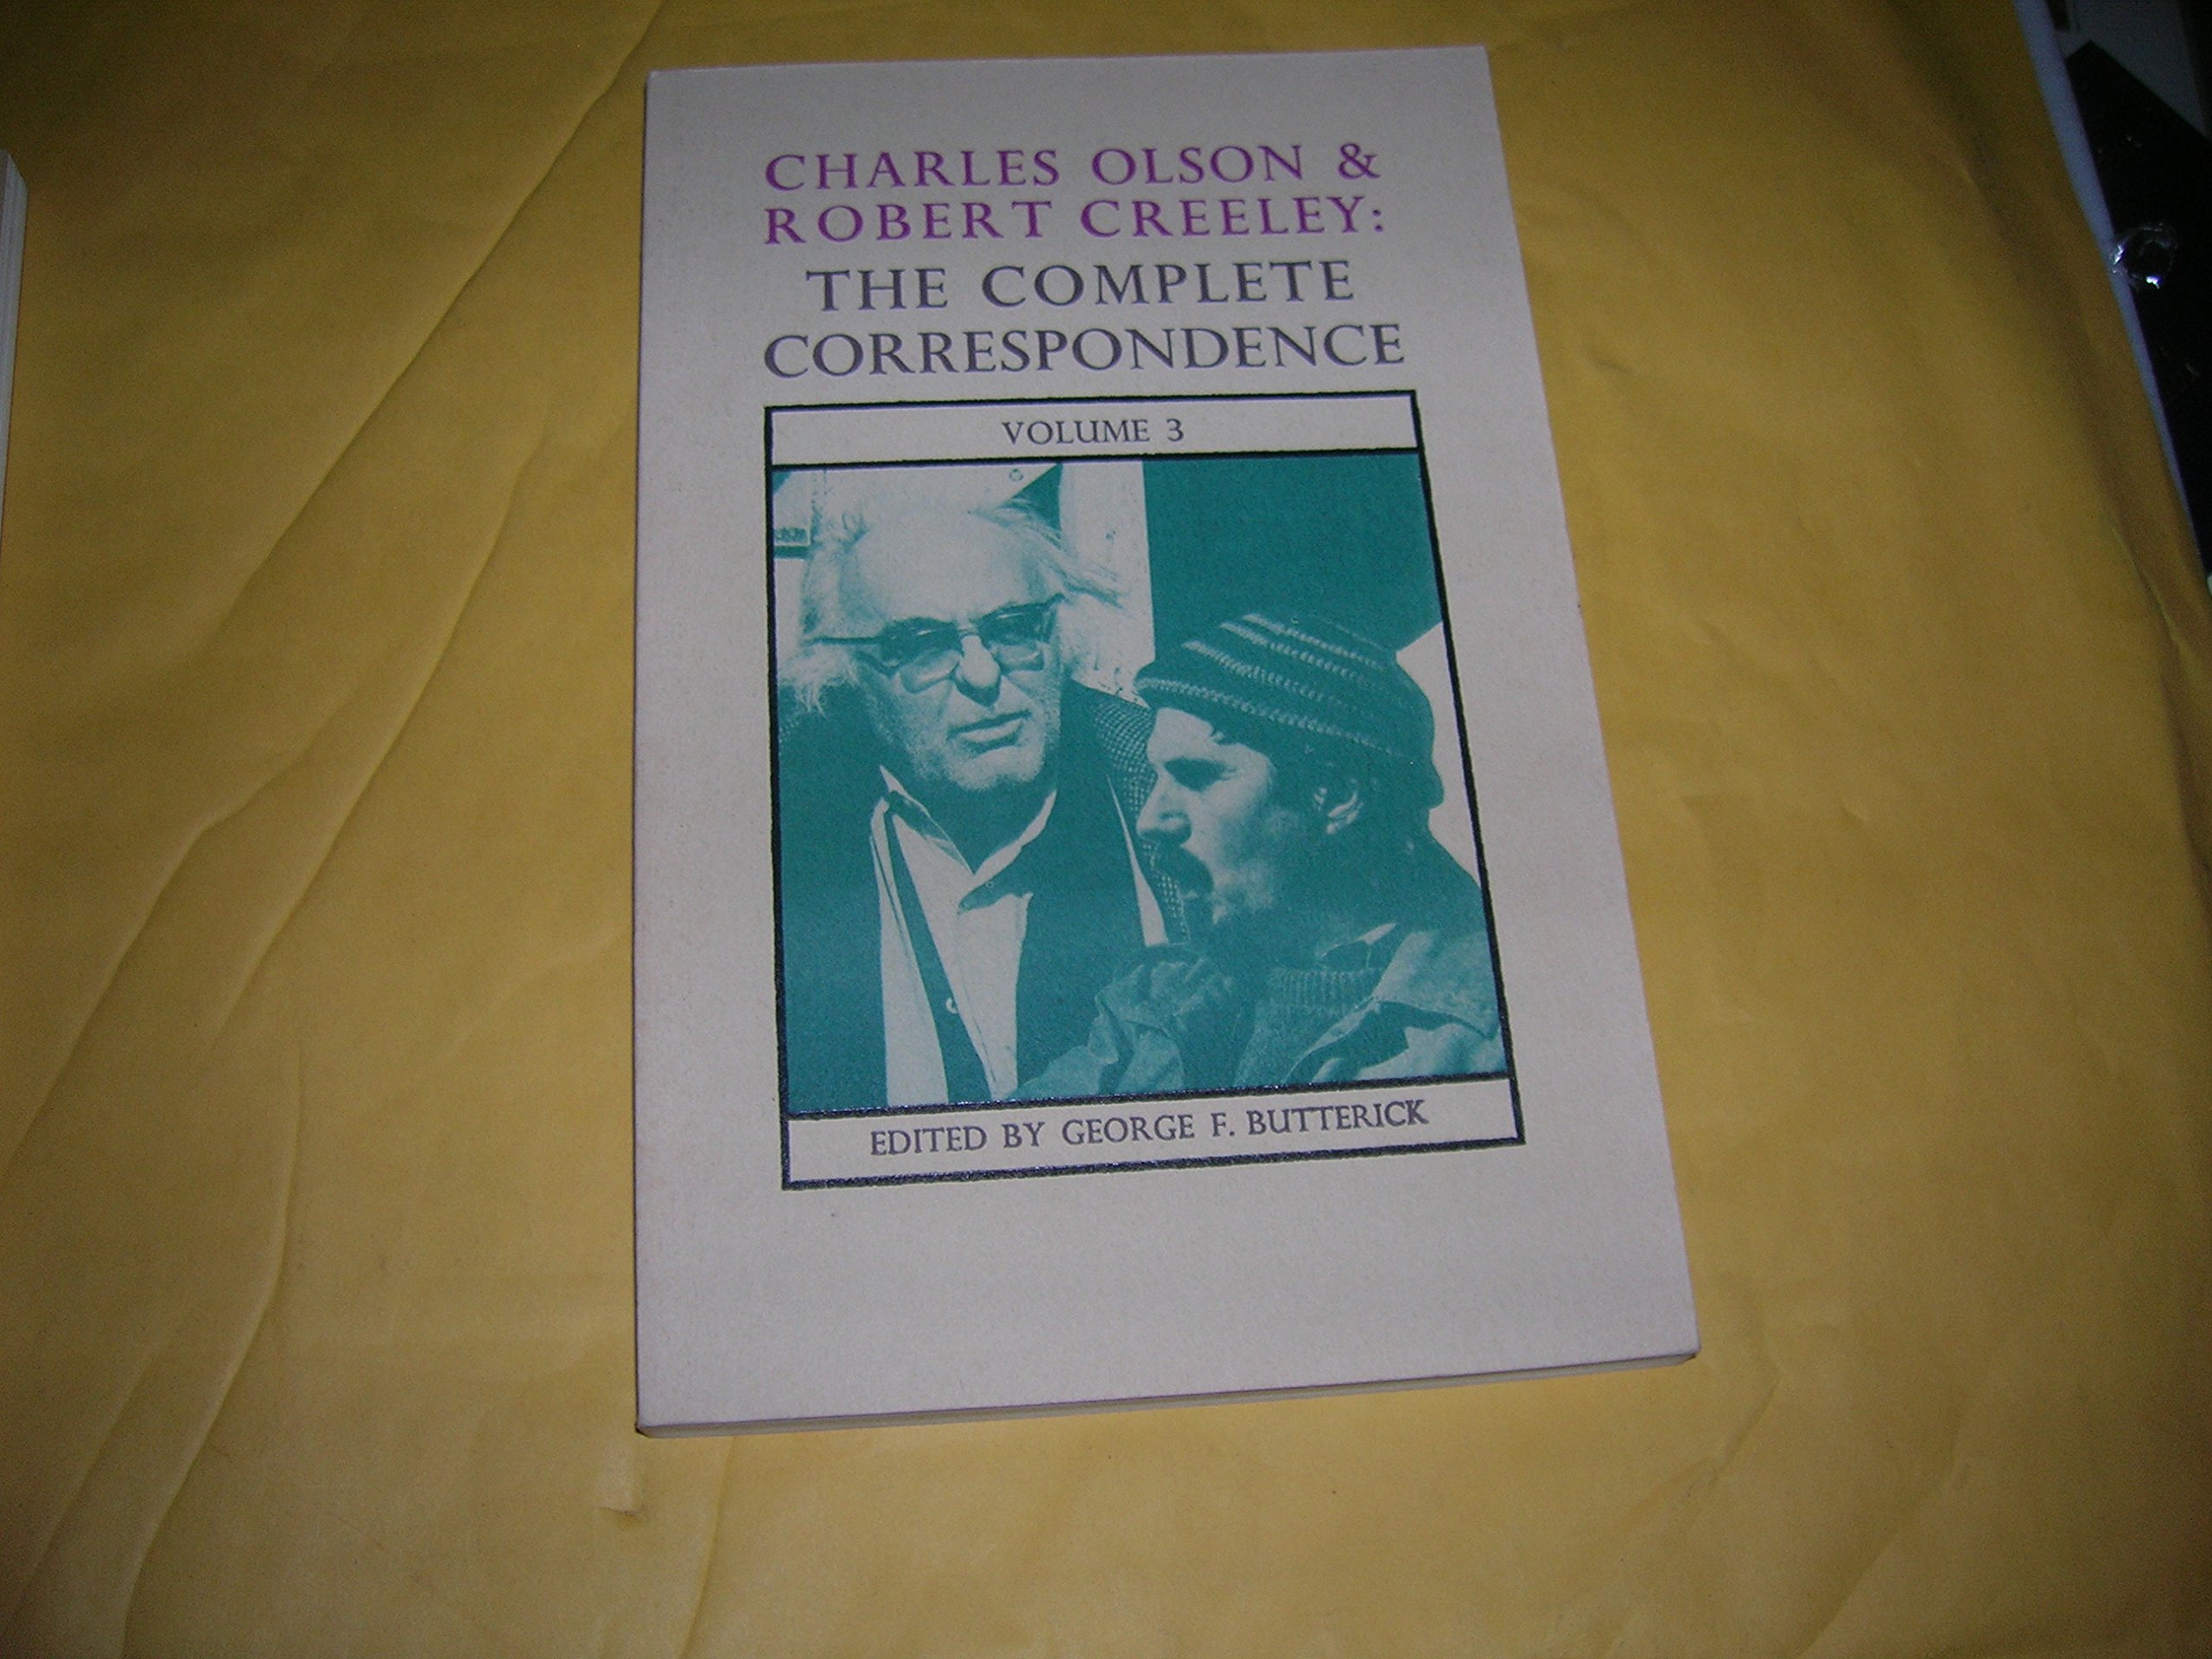 Charles Olson & Robert Creeley: The Complete Correspondence: Volume 3 - Olson, Charles; Creeley, Robert